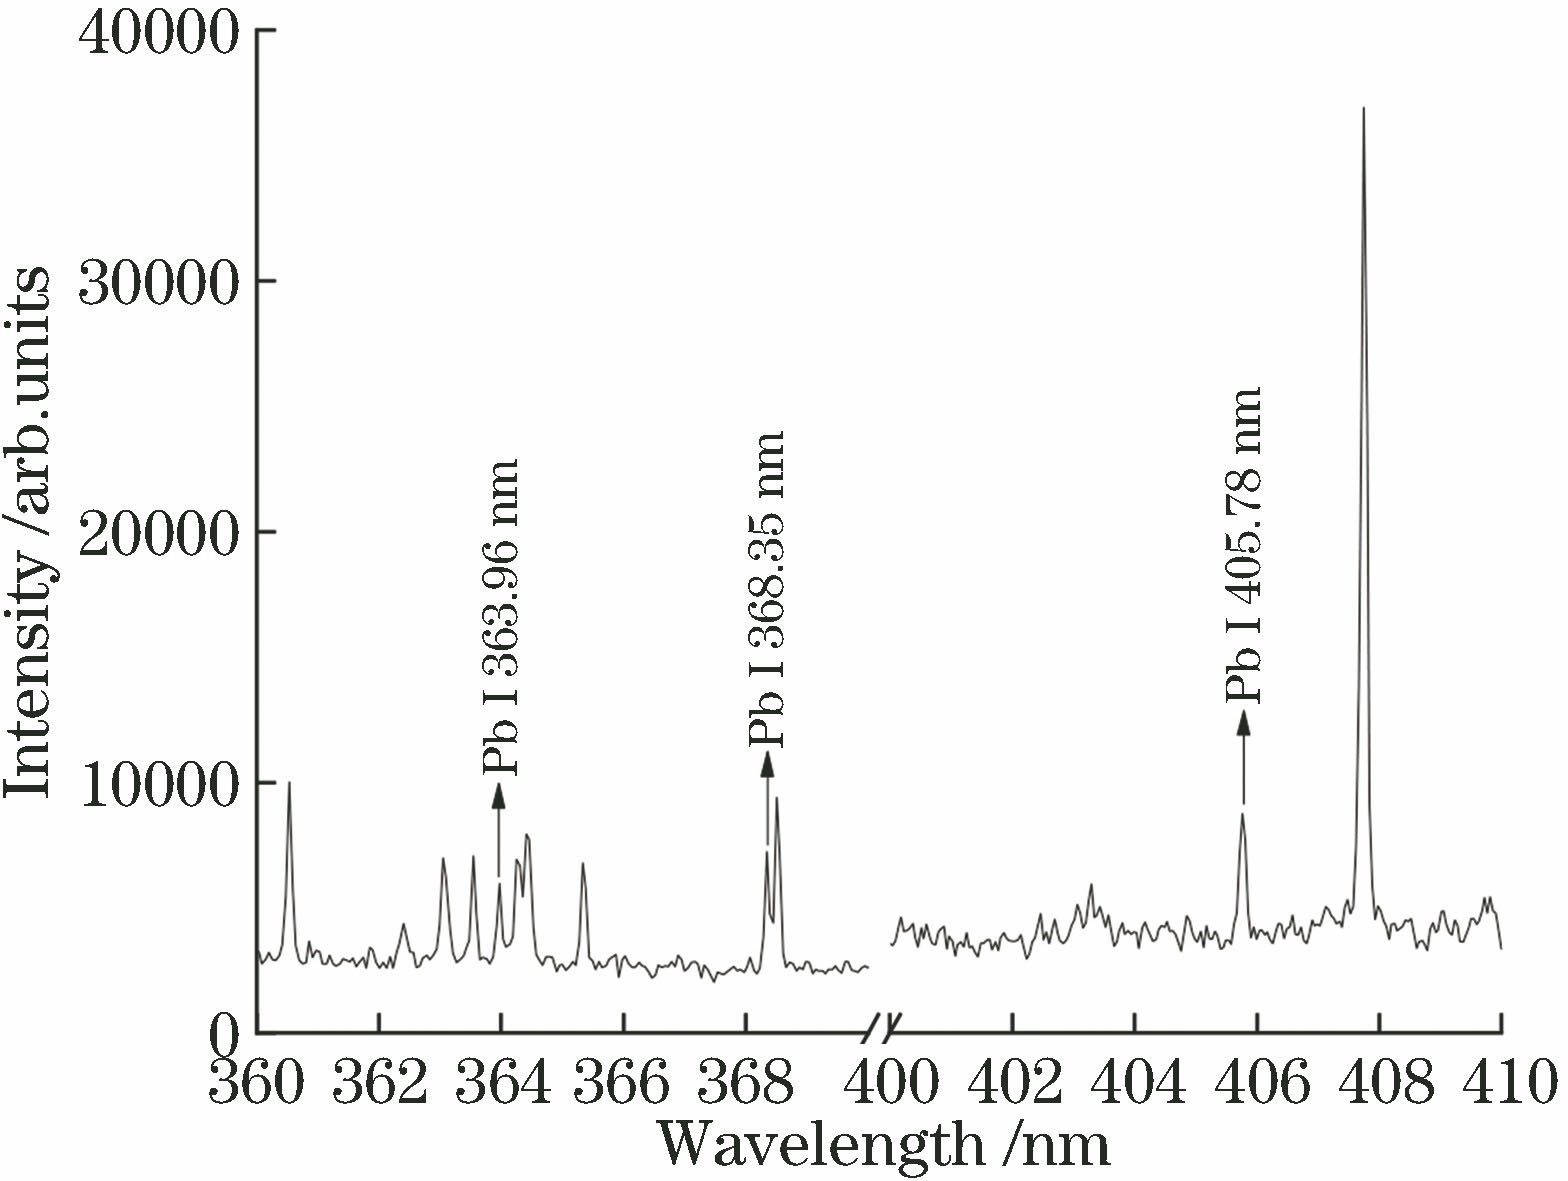 Characteristic spectra of lead in paint coatings at 308-417 nm